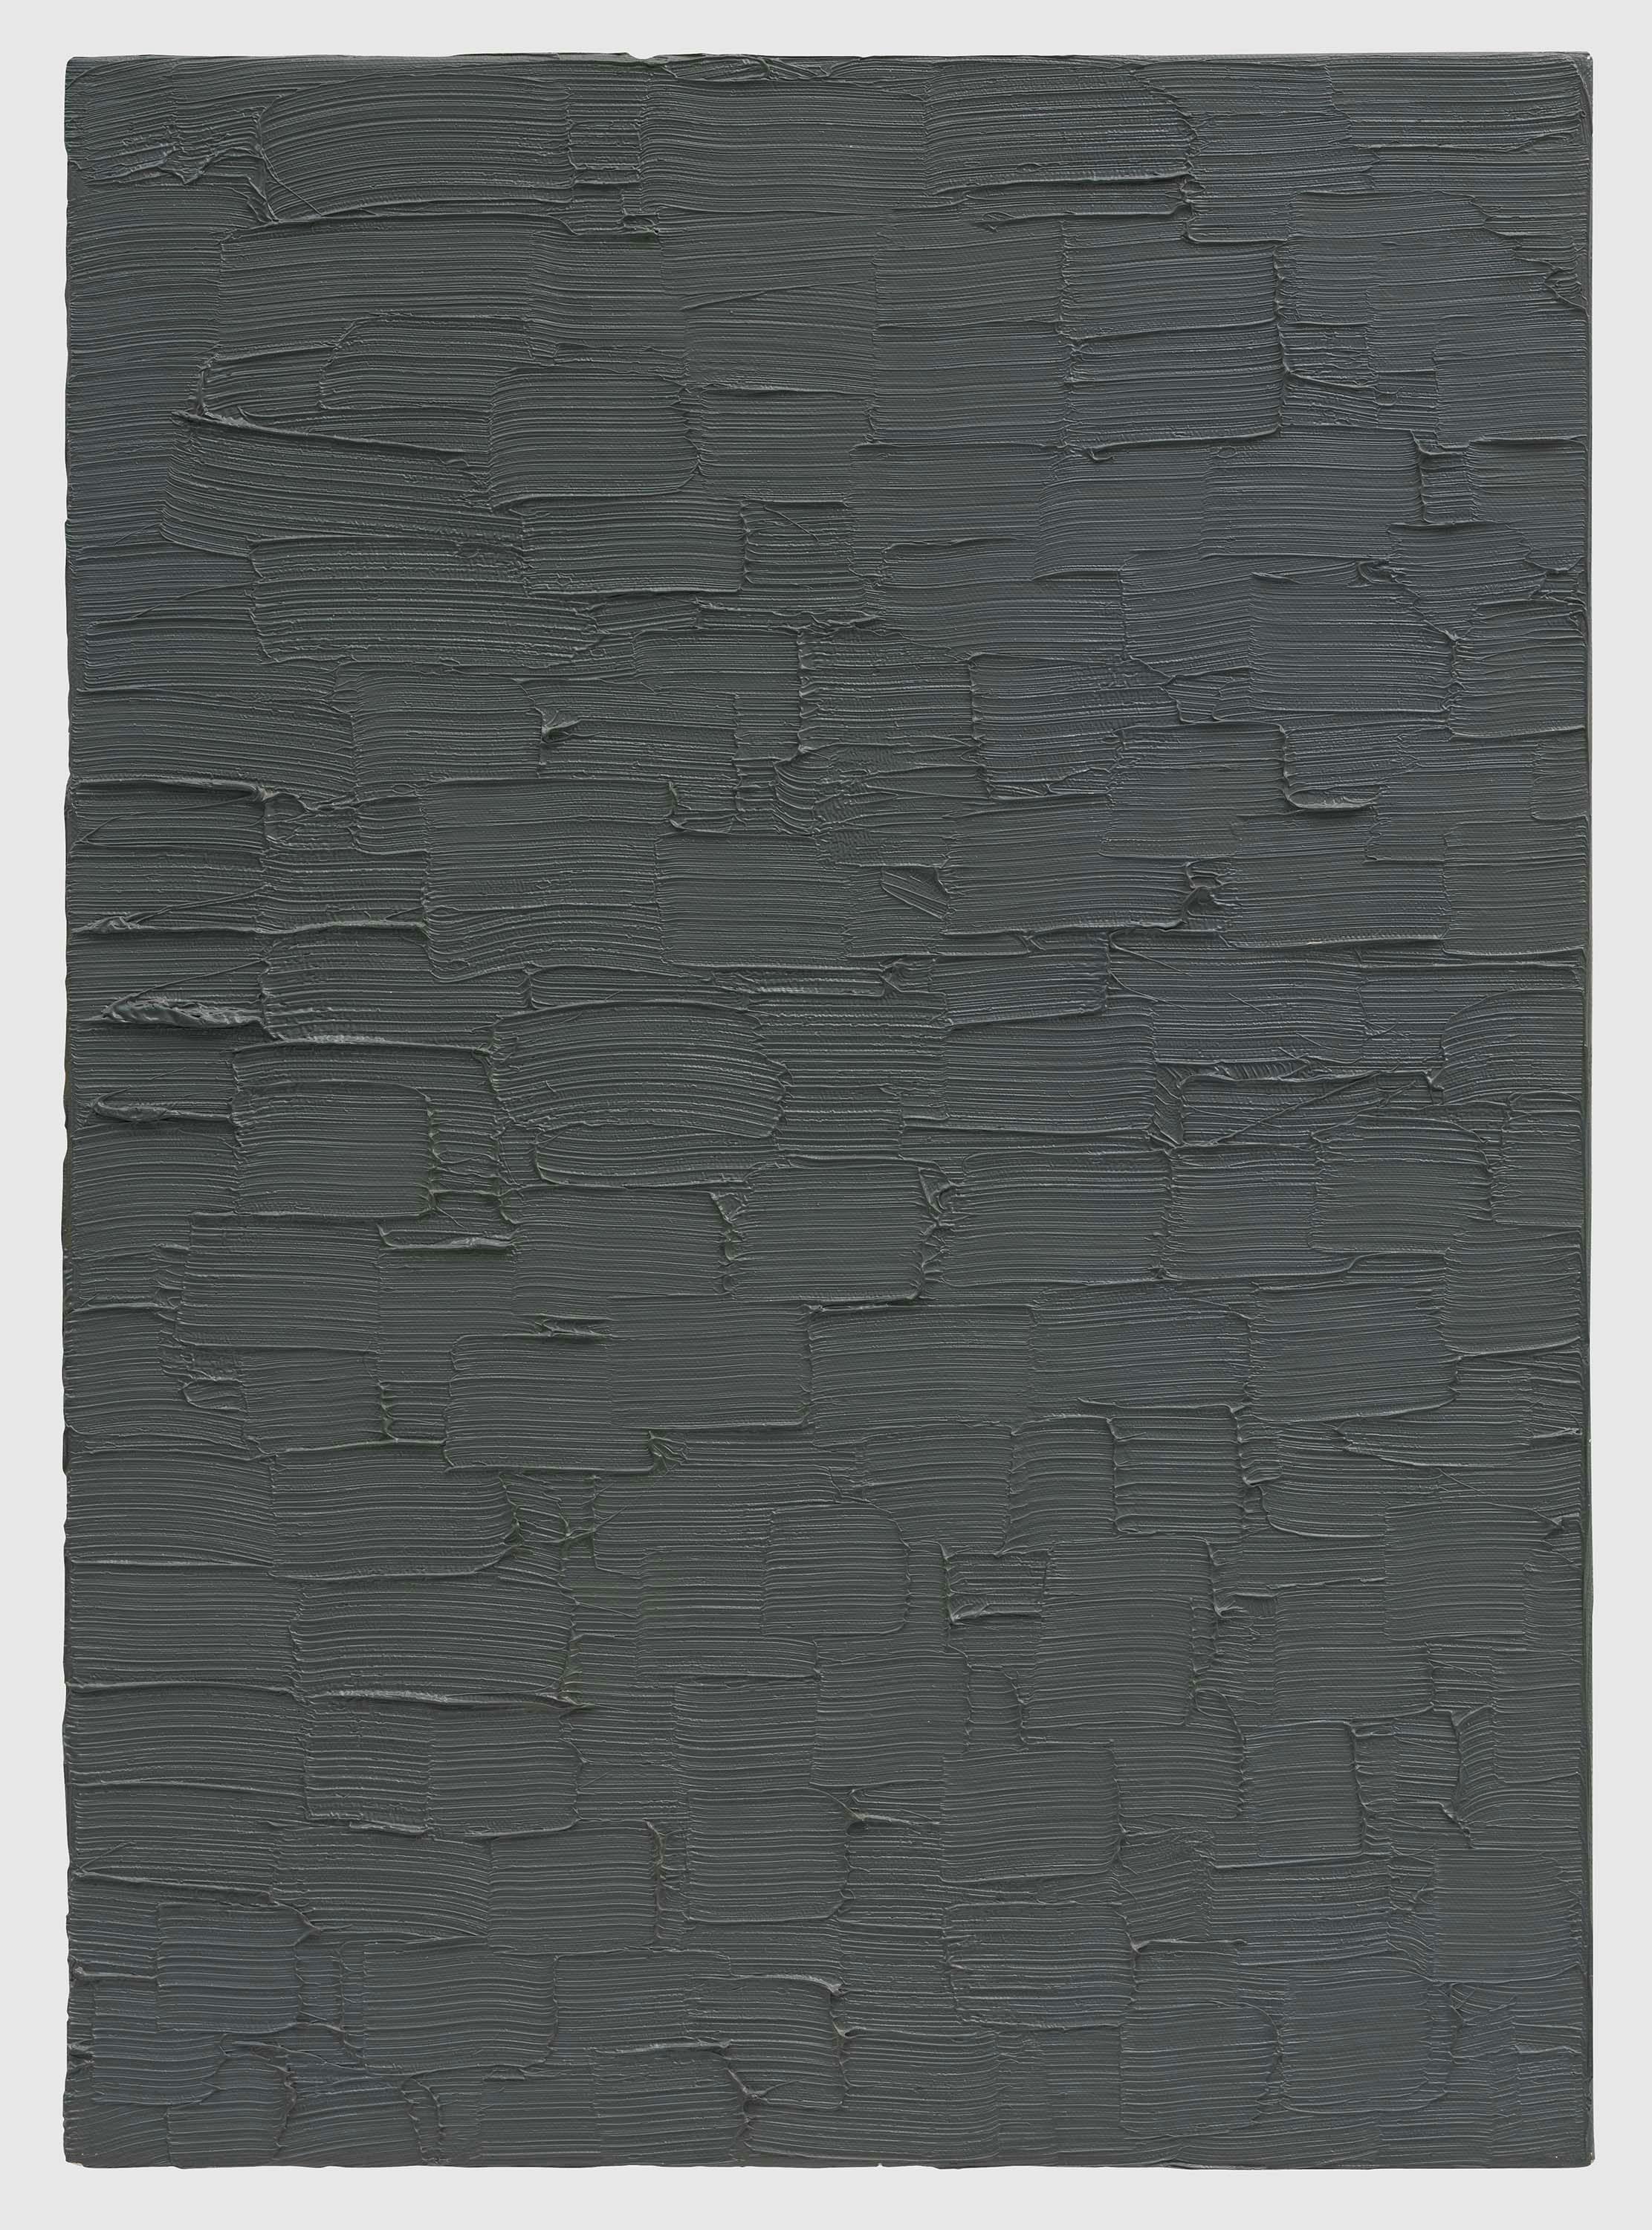 A painting by Gerhard Richter, titled Grau (Borke) (Gray [Bark]), dated 1973.